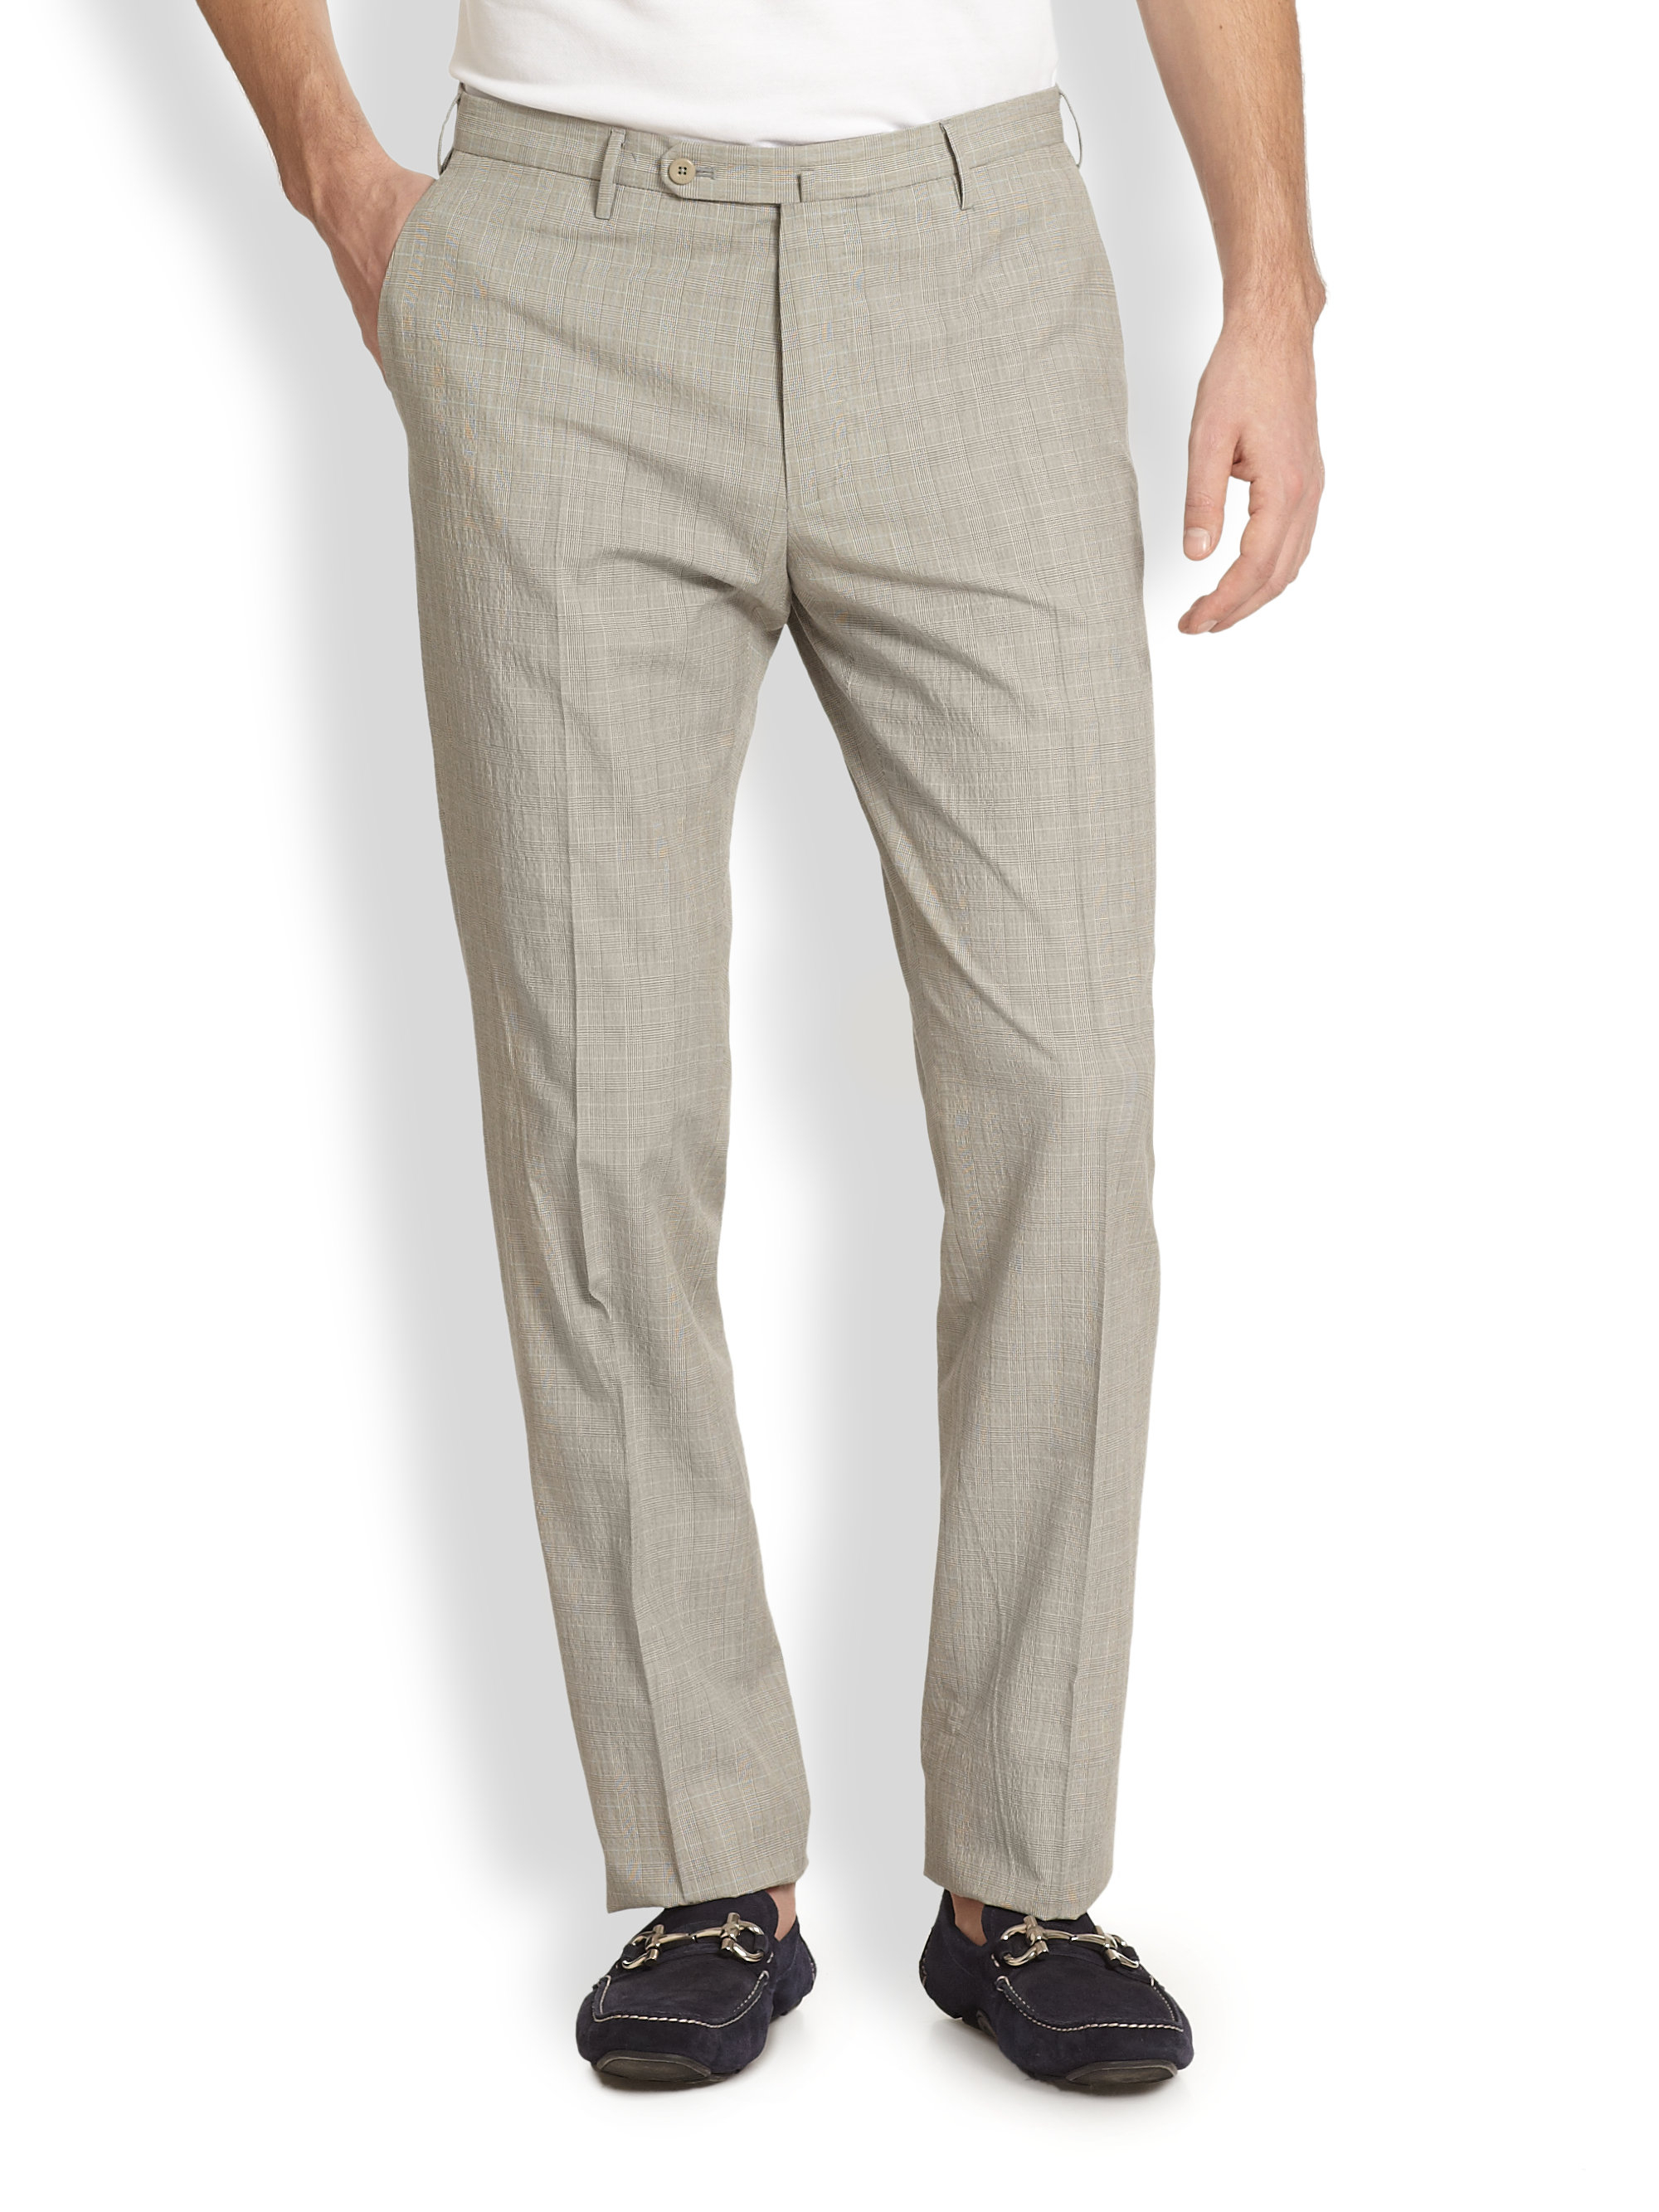 Lyst - Incotex Prince Of Wales Pants in Gray for Men